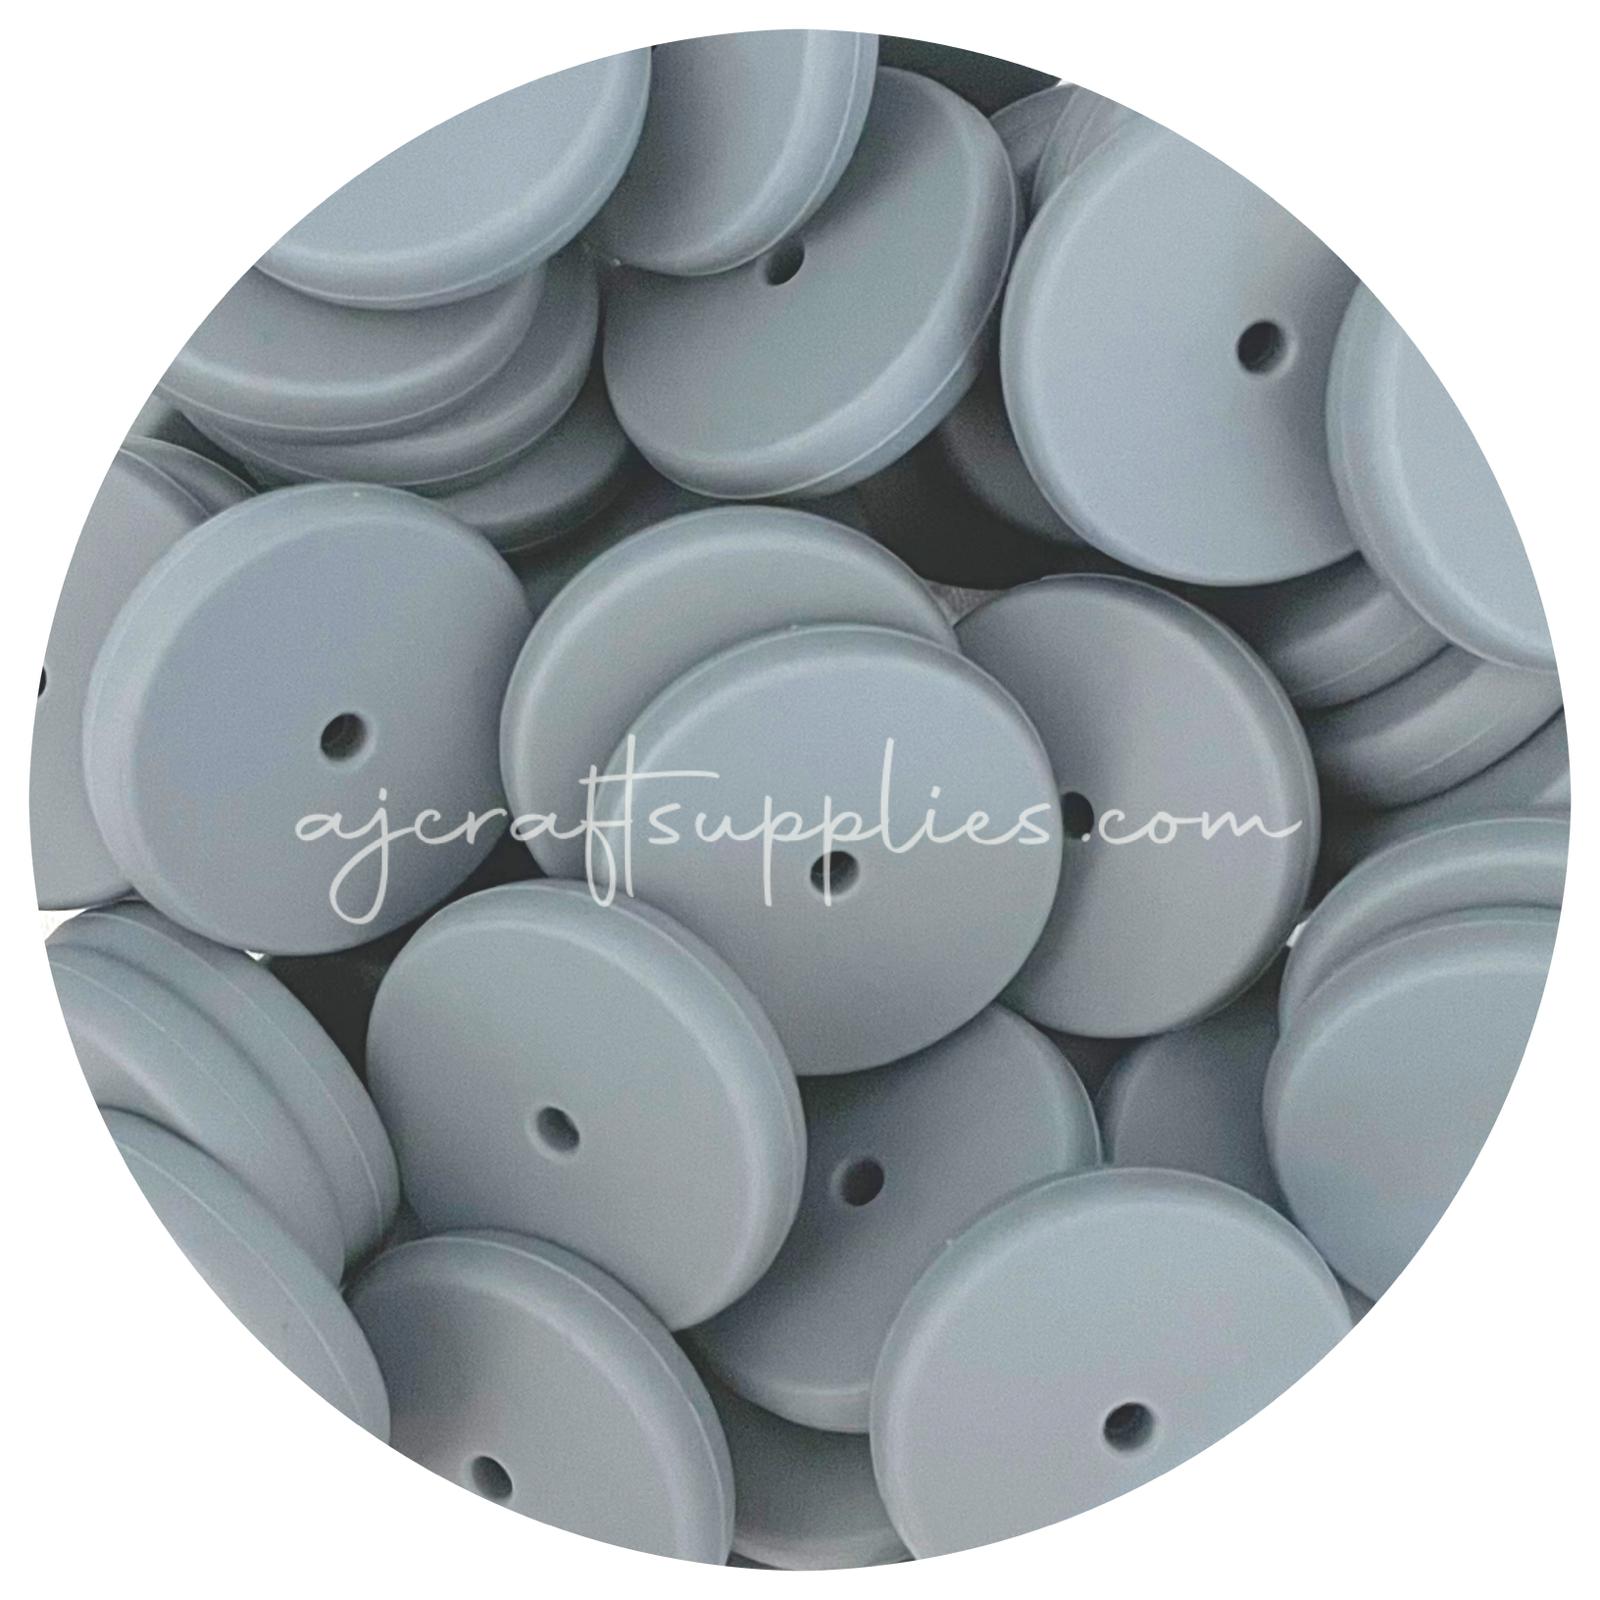 Dark Grey - 25mm Flat Coin Silicone Beads - 5 beads